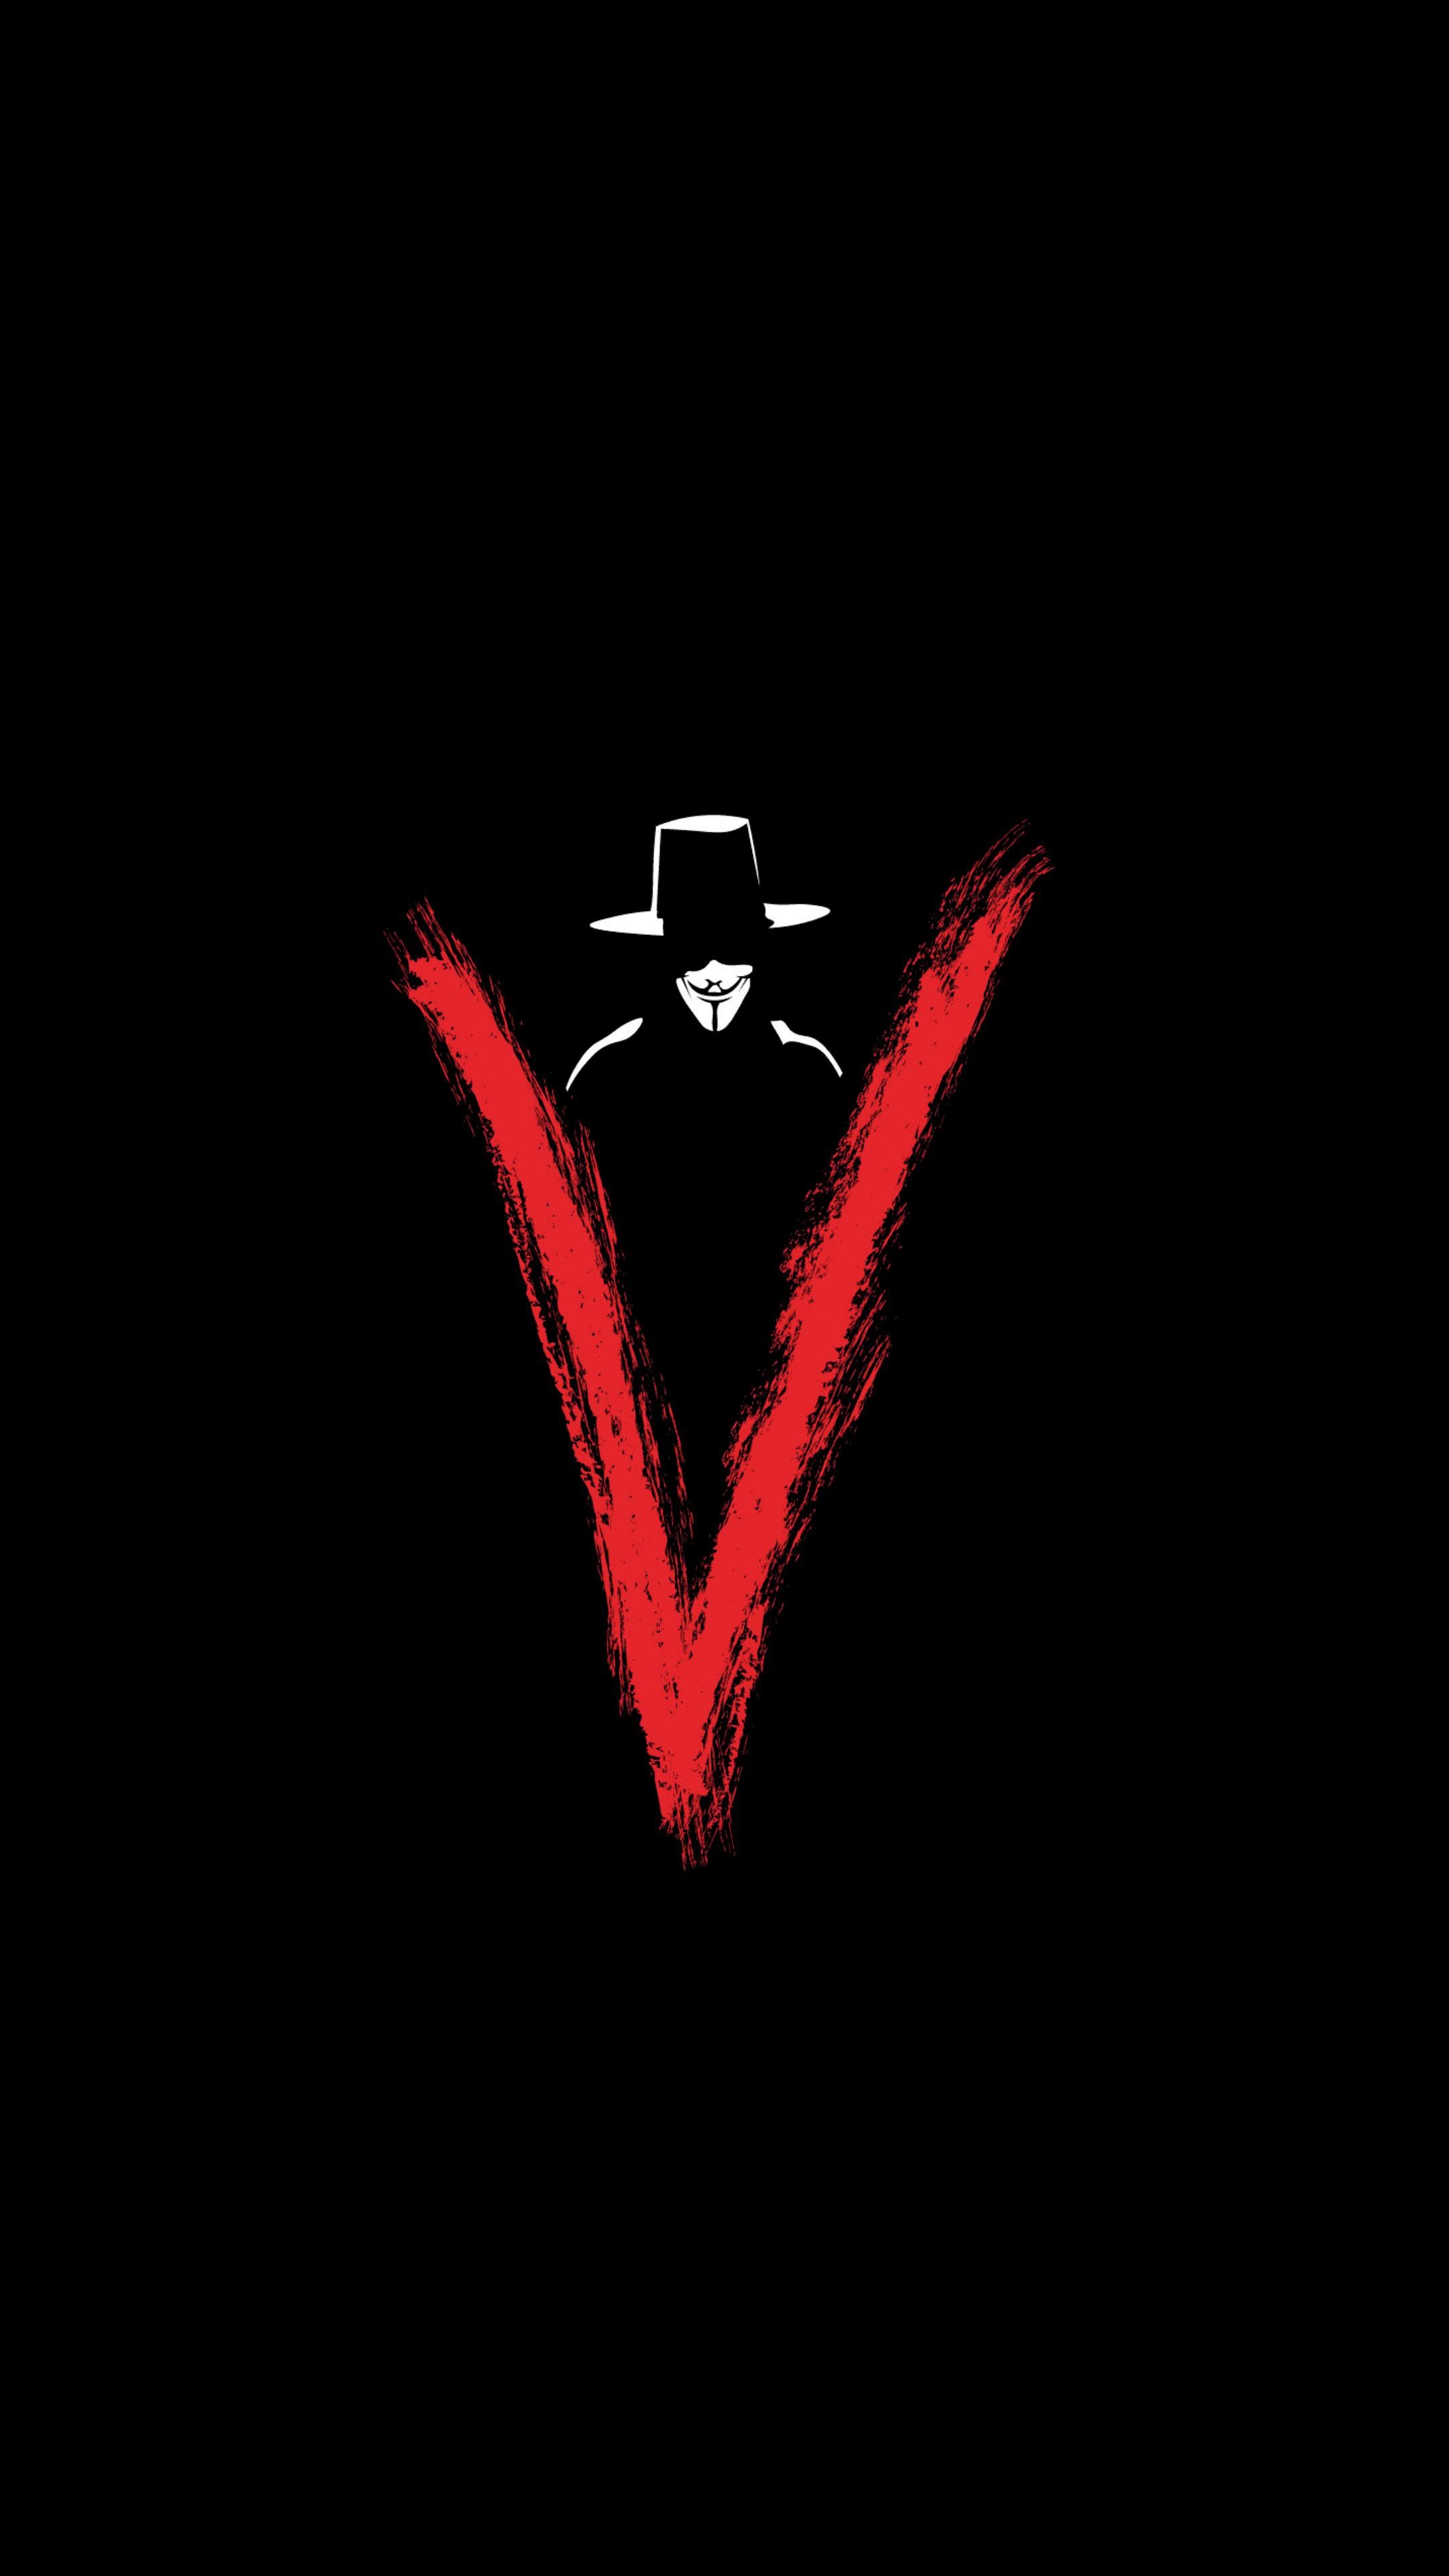 V for Vendetta: It is based on the 1988 DC Vertigo Comics limited series by Alan Moore, David Lloyd, and Tony Weare. 2160x3840 4K Background.